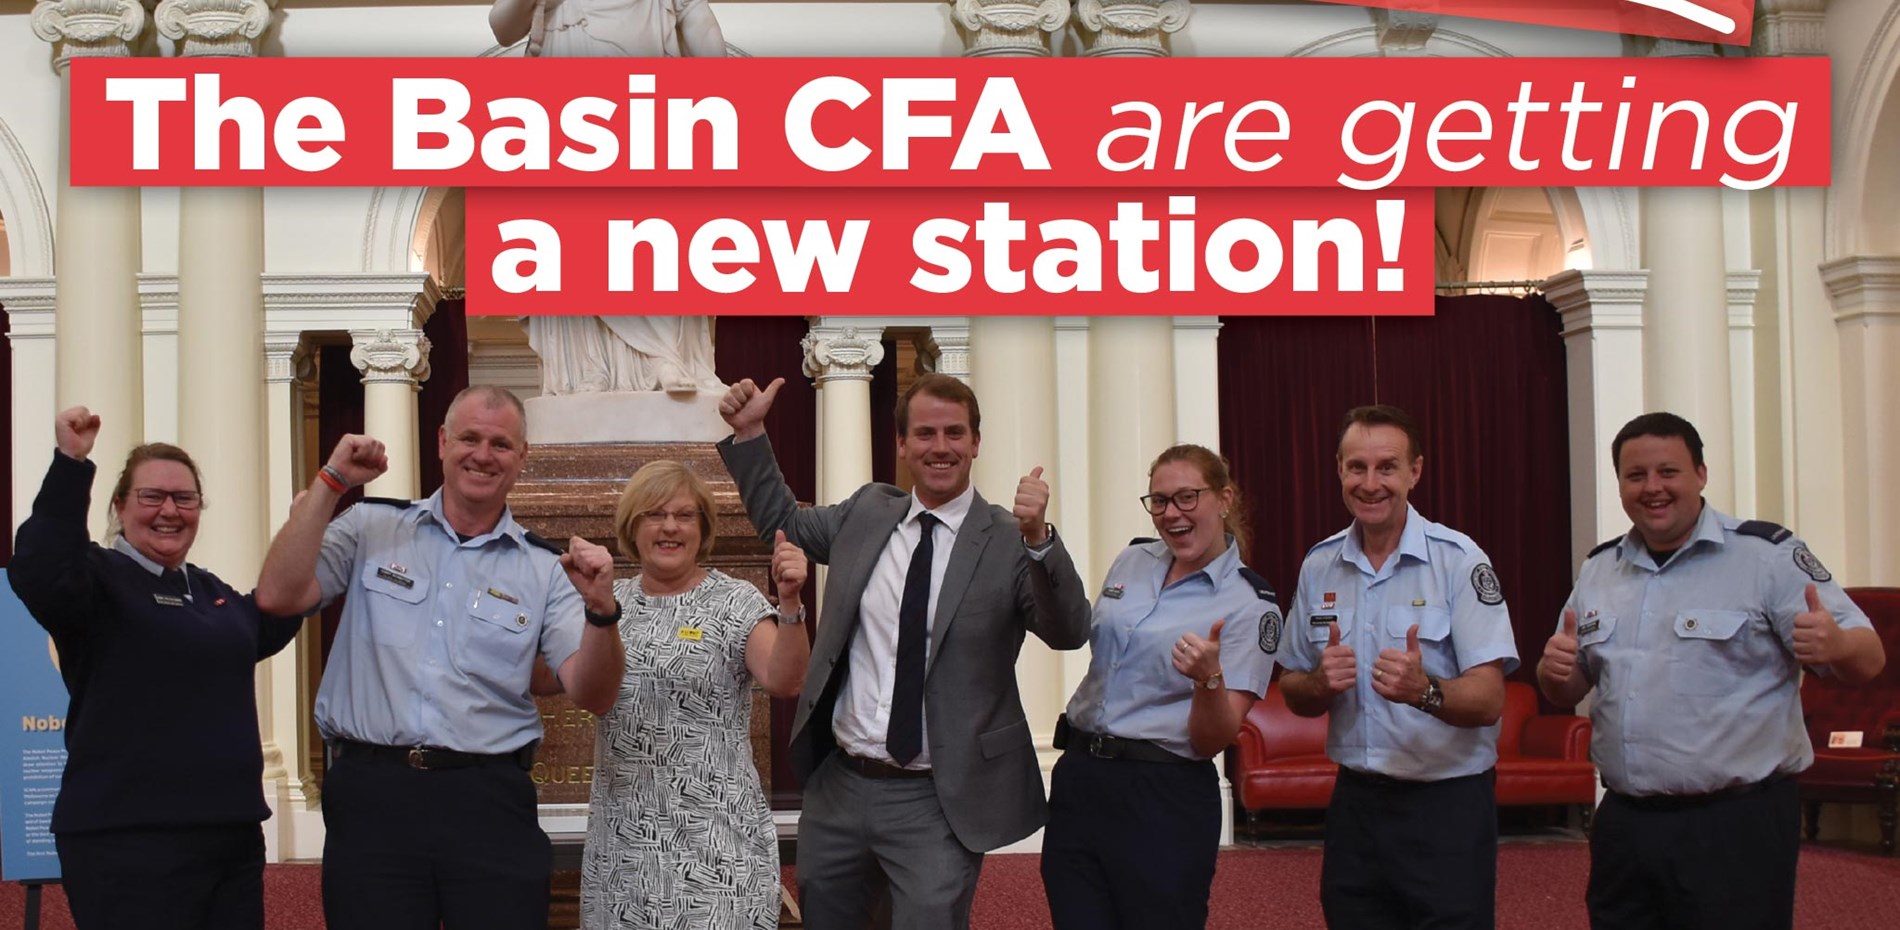 NEW STATION PLANS FOR THE BASIN CFA  Main Image